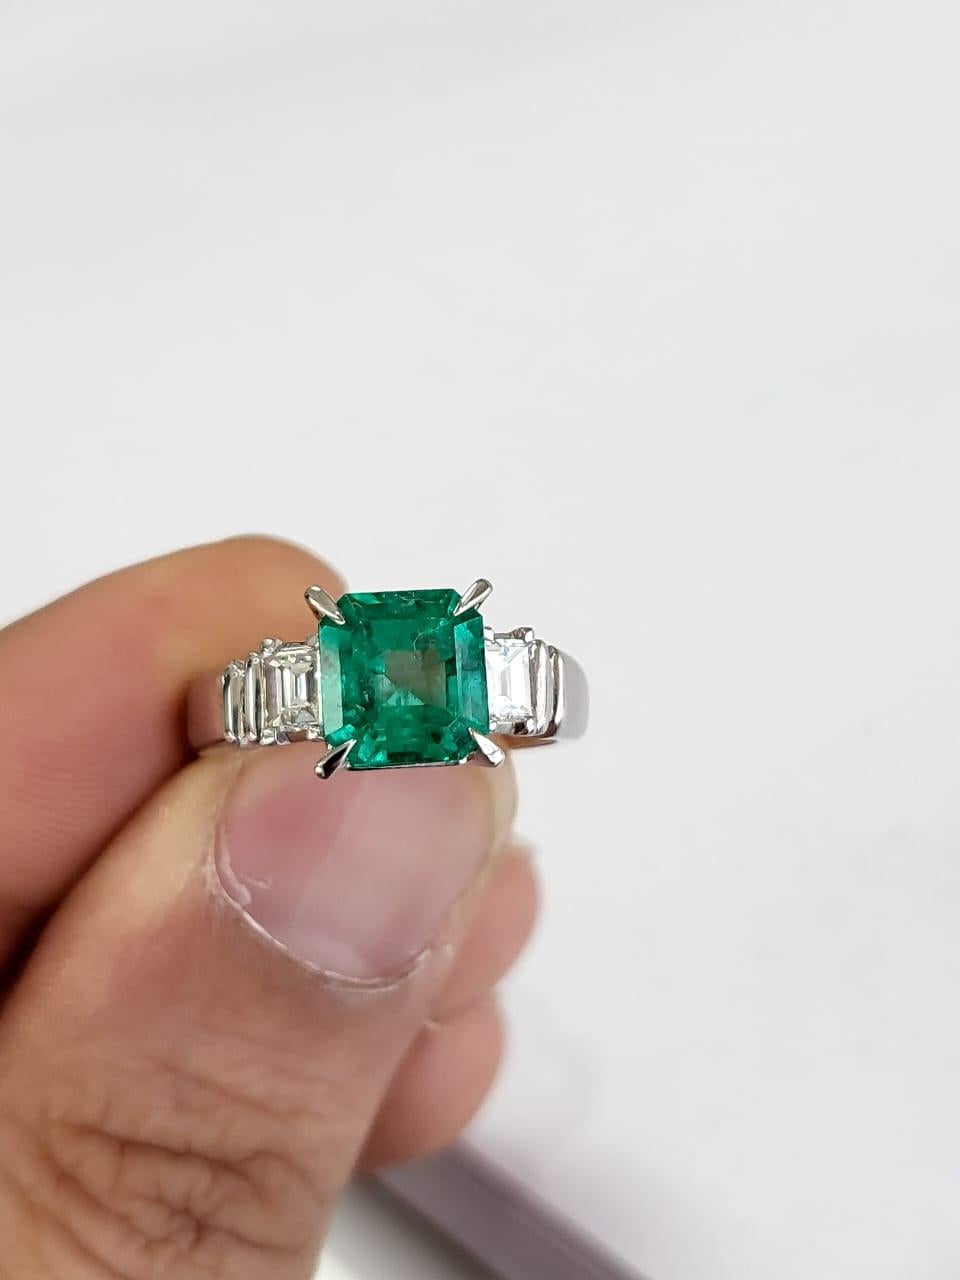 A very beautiful and one of a kind, modern style, Emerald Engagement Ring set in Platinum 900 & Diamonds. The weight of the step cut, octagonal Emerald is 2.05 carats. The Emerald is of Colombian origin has 